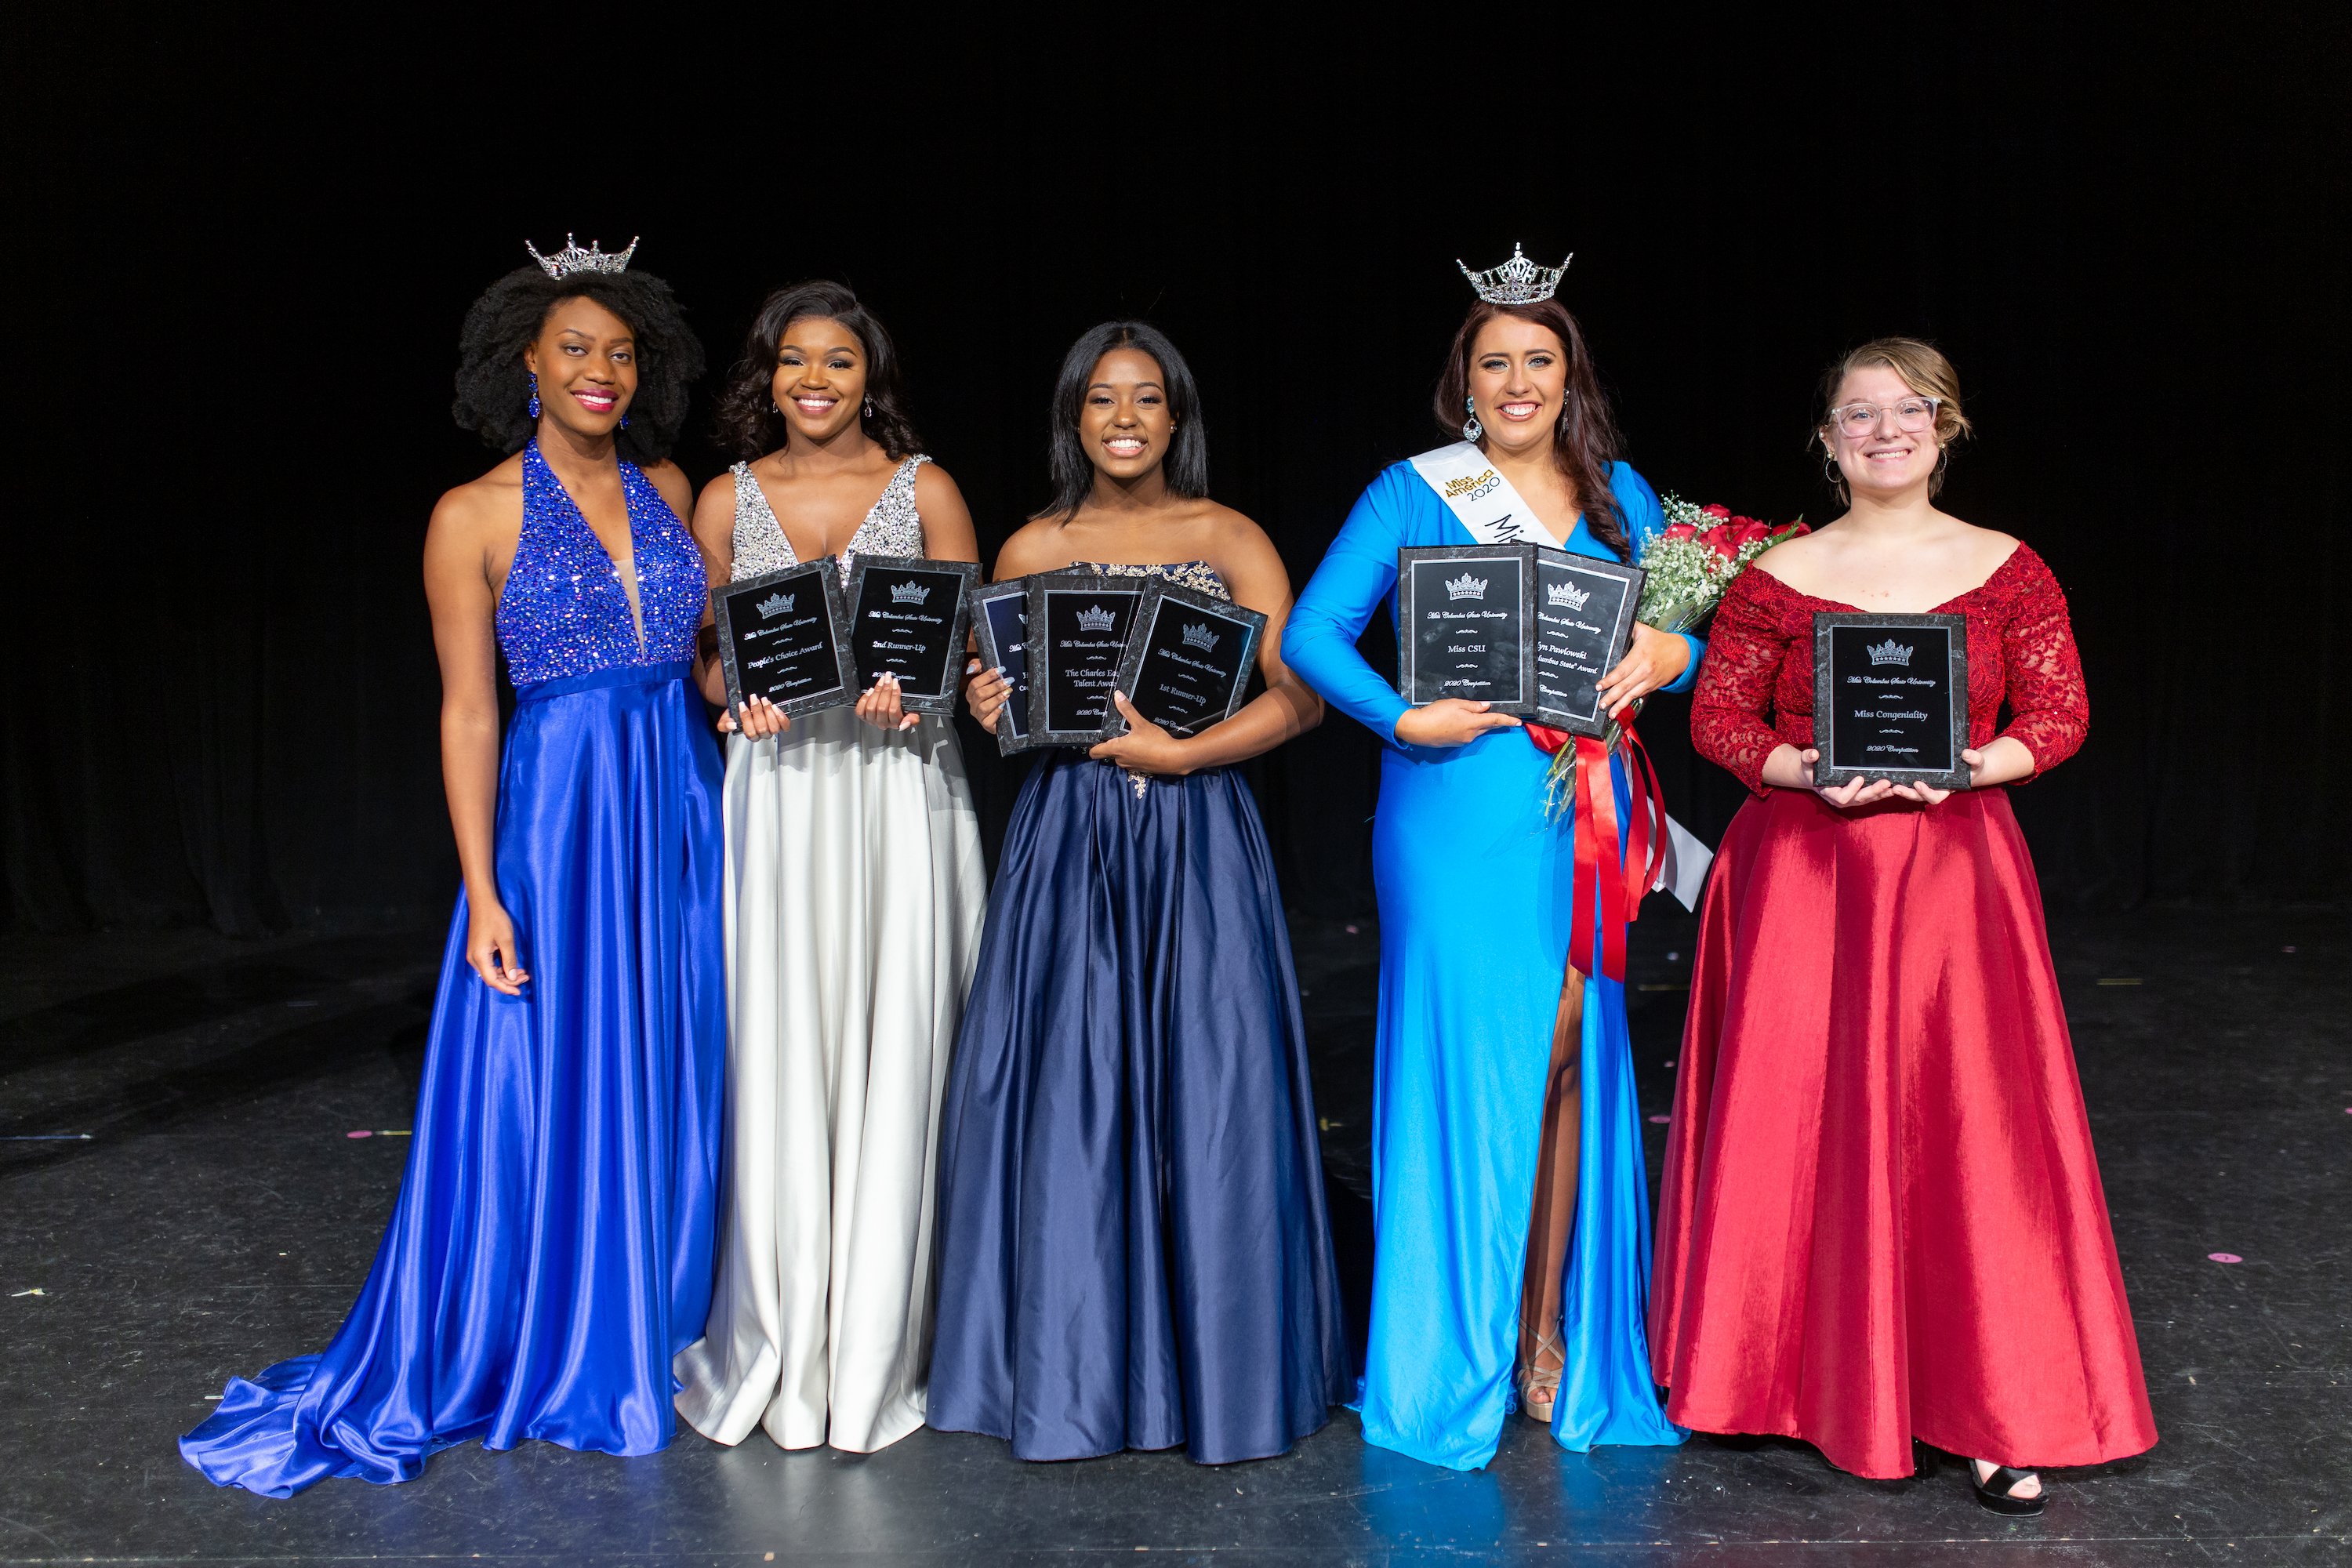 Five women in evening gowns are wearing tiaras and holding awards.